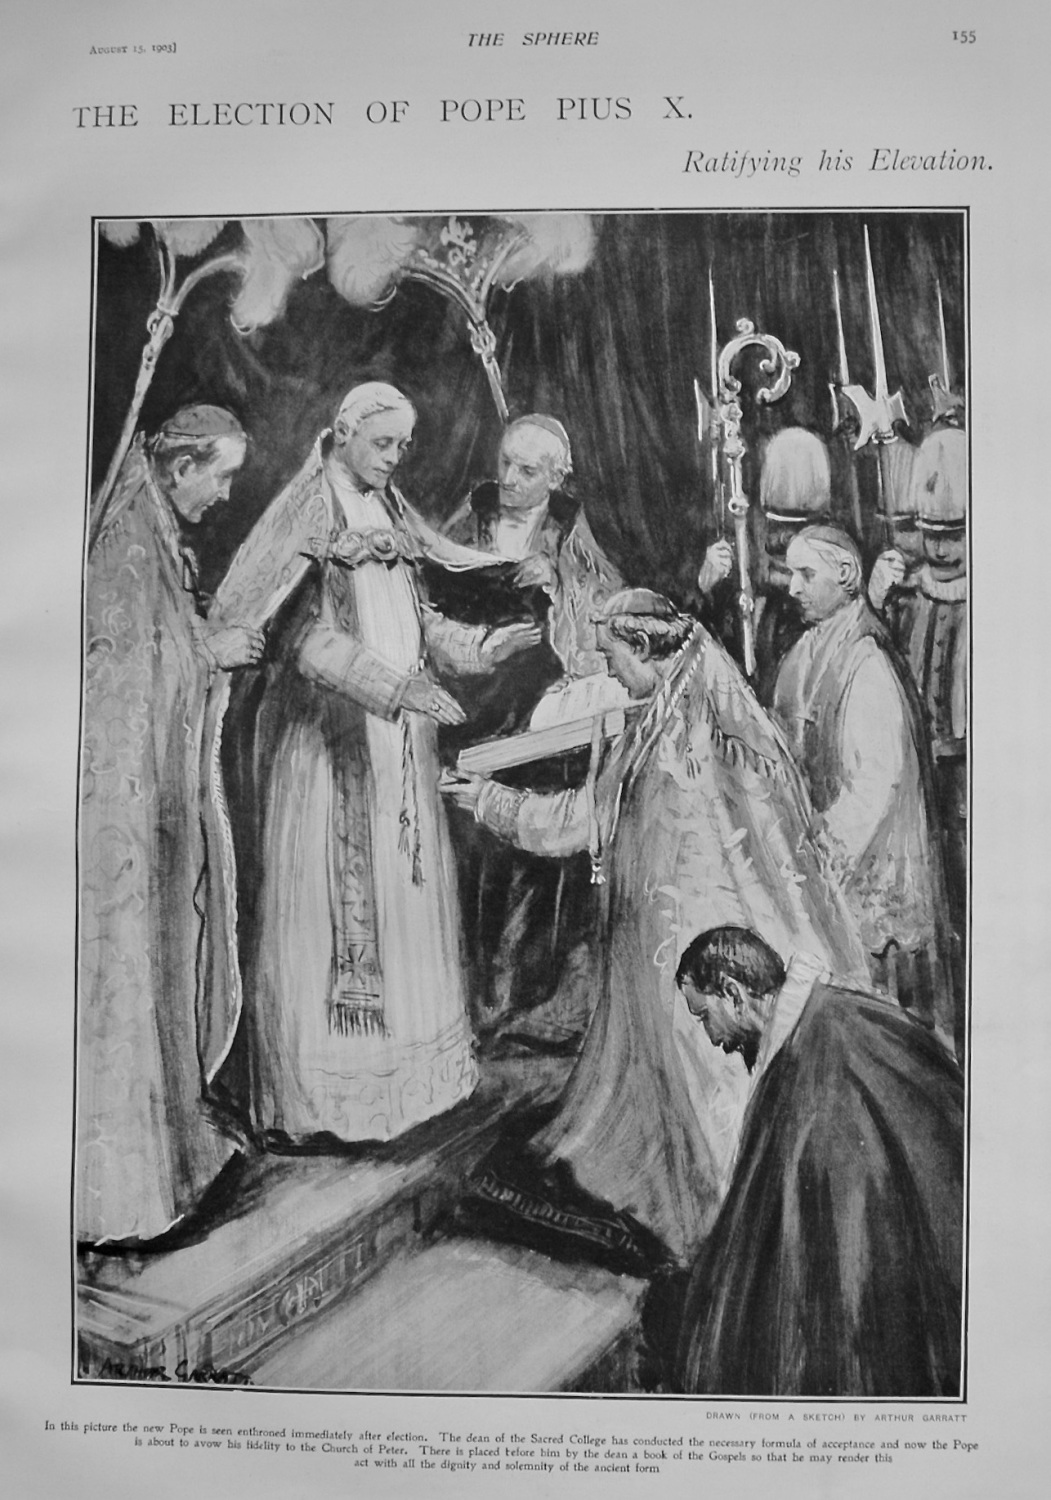 The Election of Pope Pius X. : Ratifying his Declaration. 1903